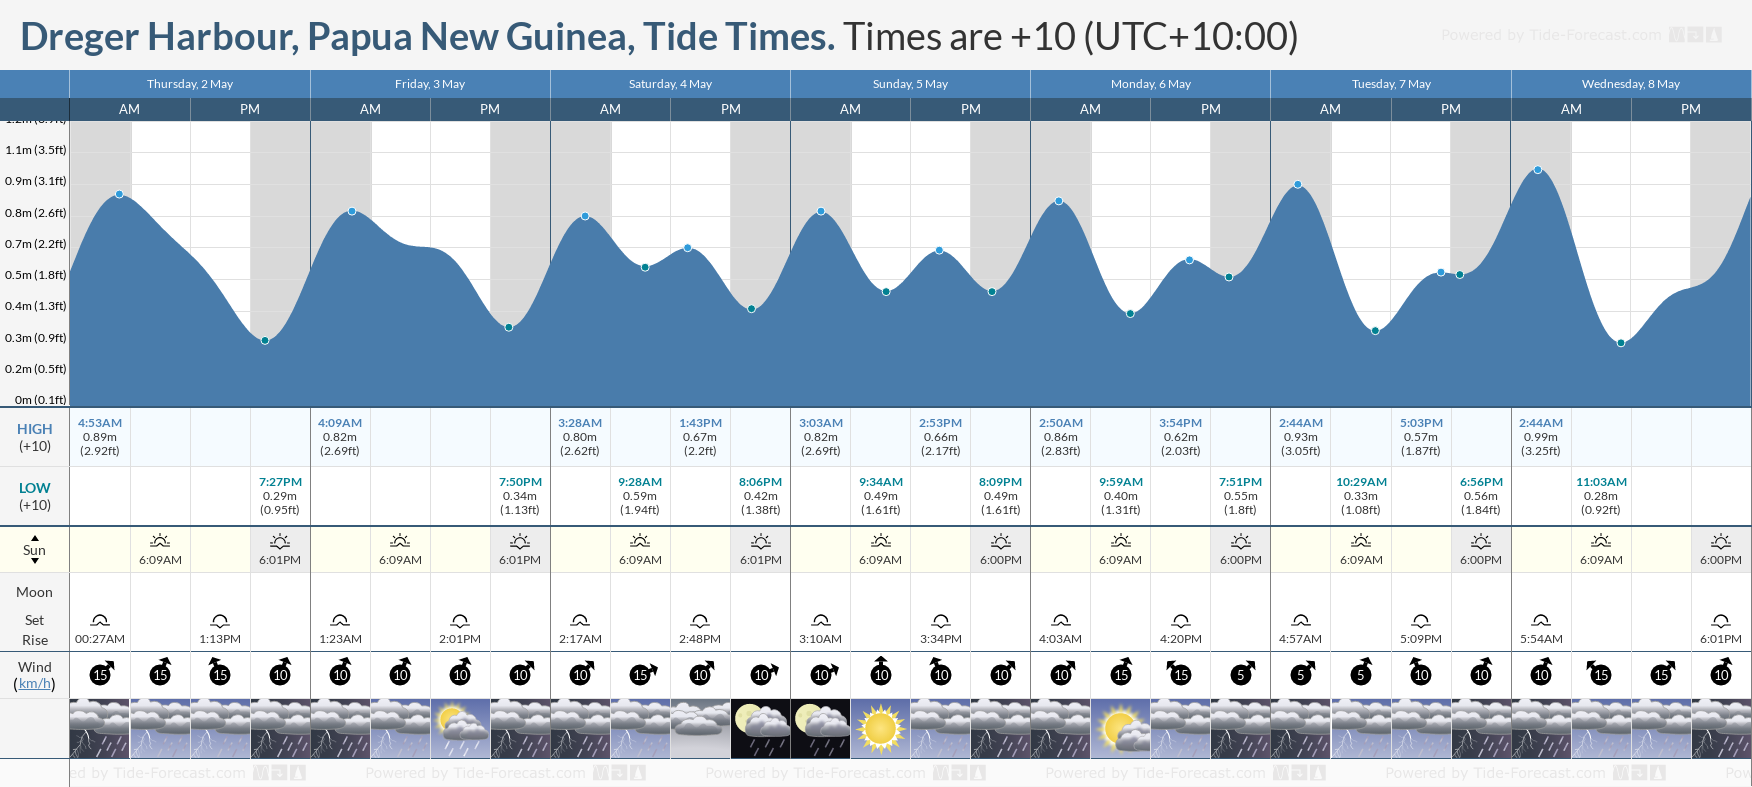 Dreger Harbour, Papua New Guinea Tide Chart including high and low tide tide times for the next 7 days